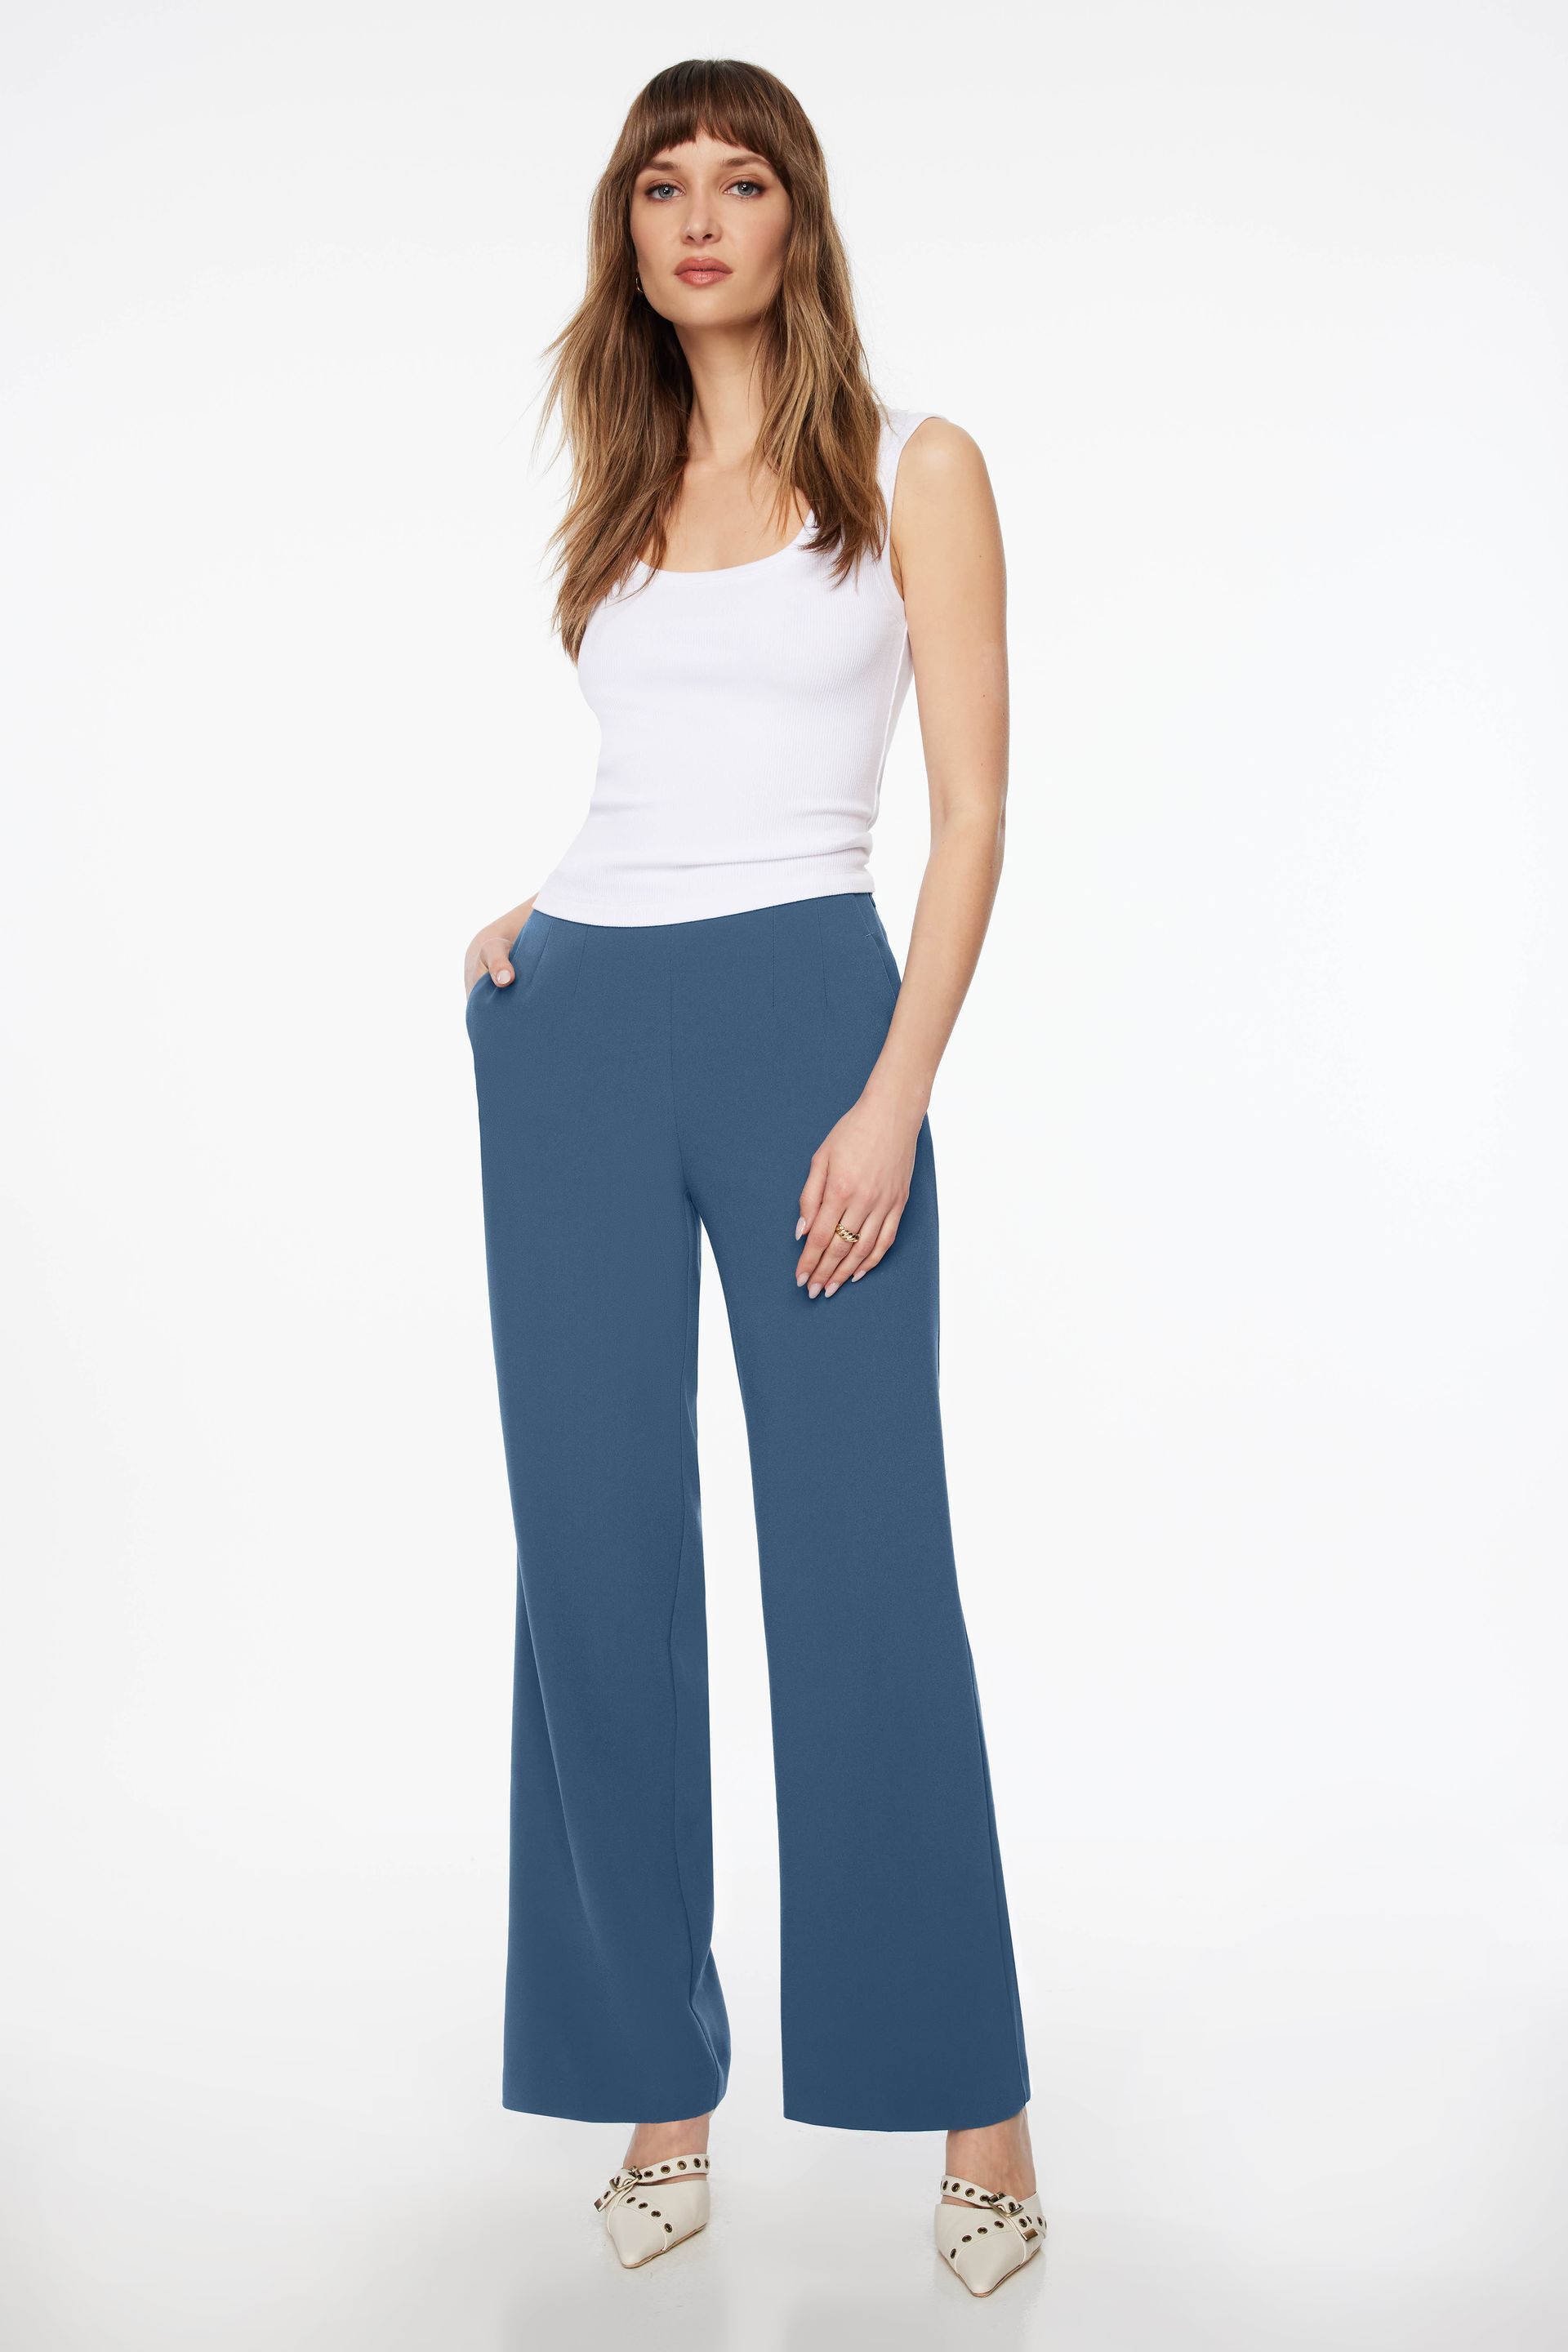 Buy Wine Trousers & Pants for Women by WUXI Online | Ajio.com